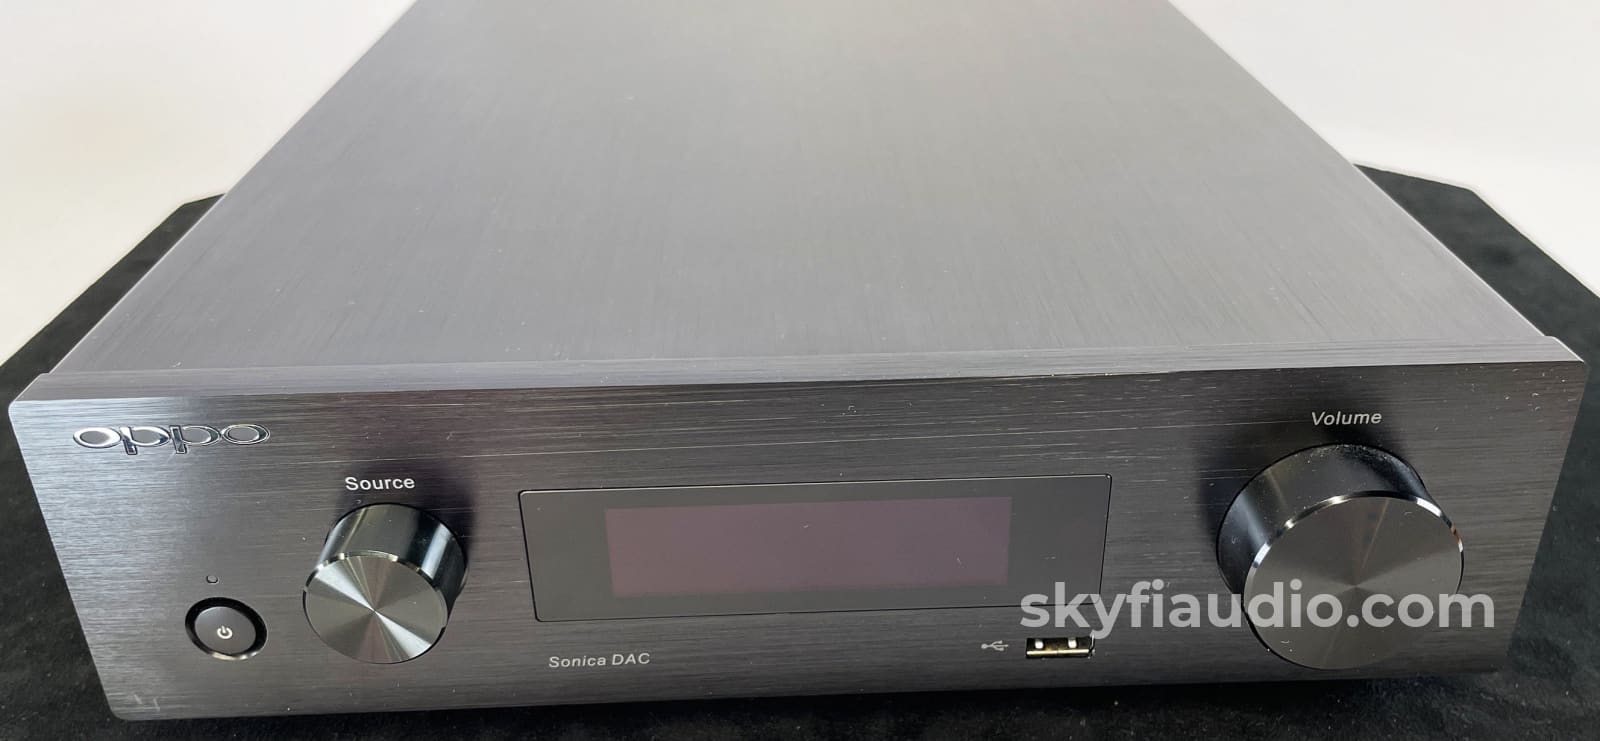 Oppo Sonica Audiophile Dac And Network Streamer - Ess Es9038Pro Sabre Pro Cd + Digital